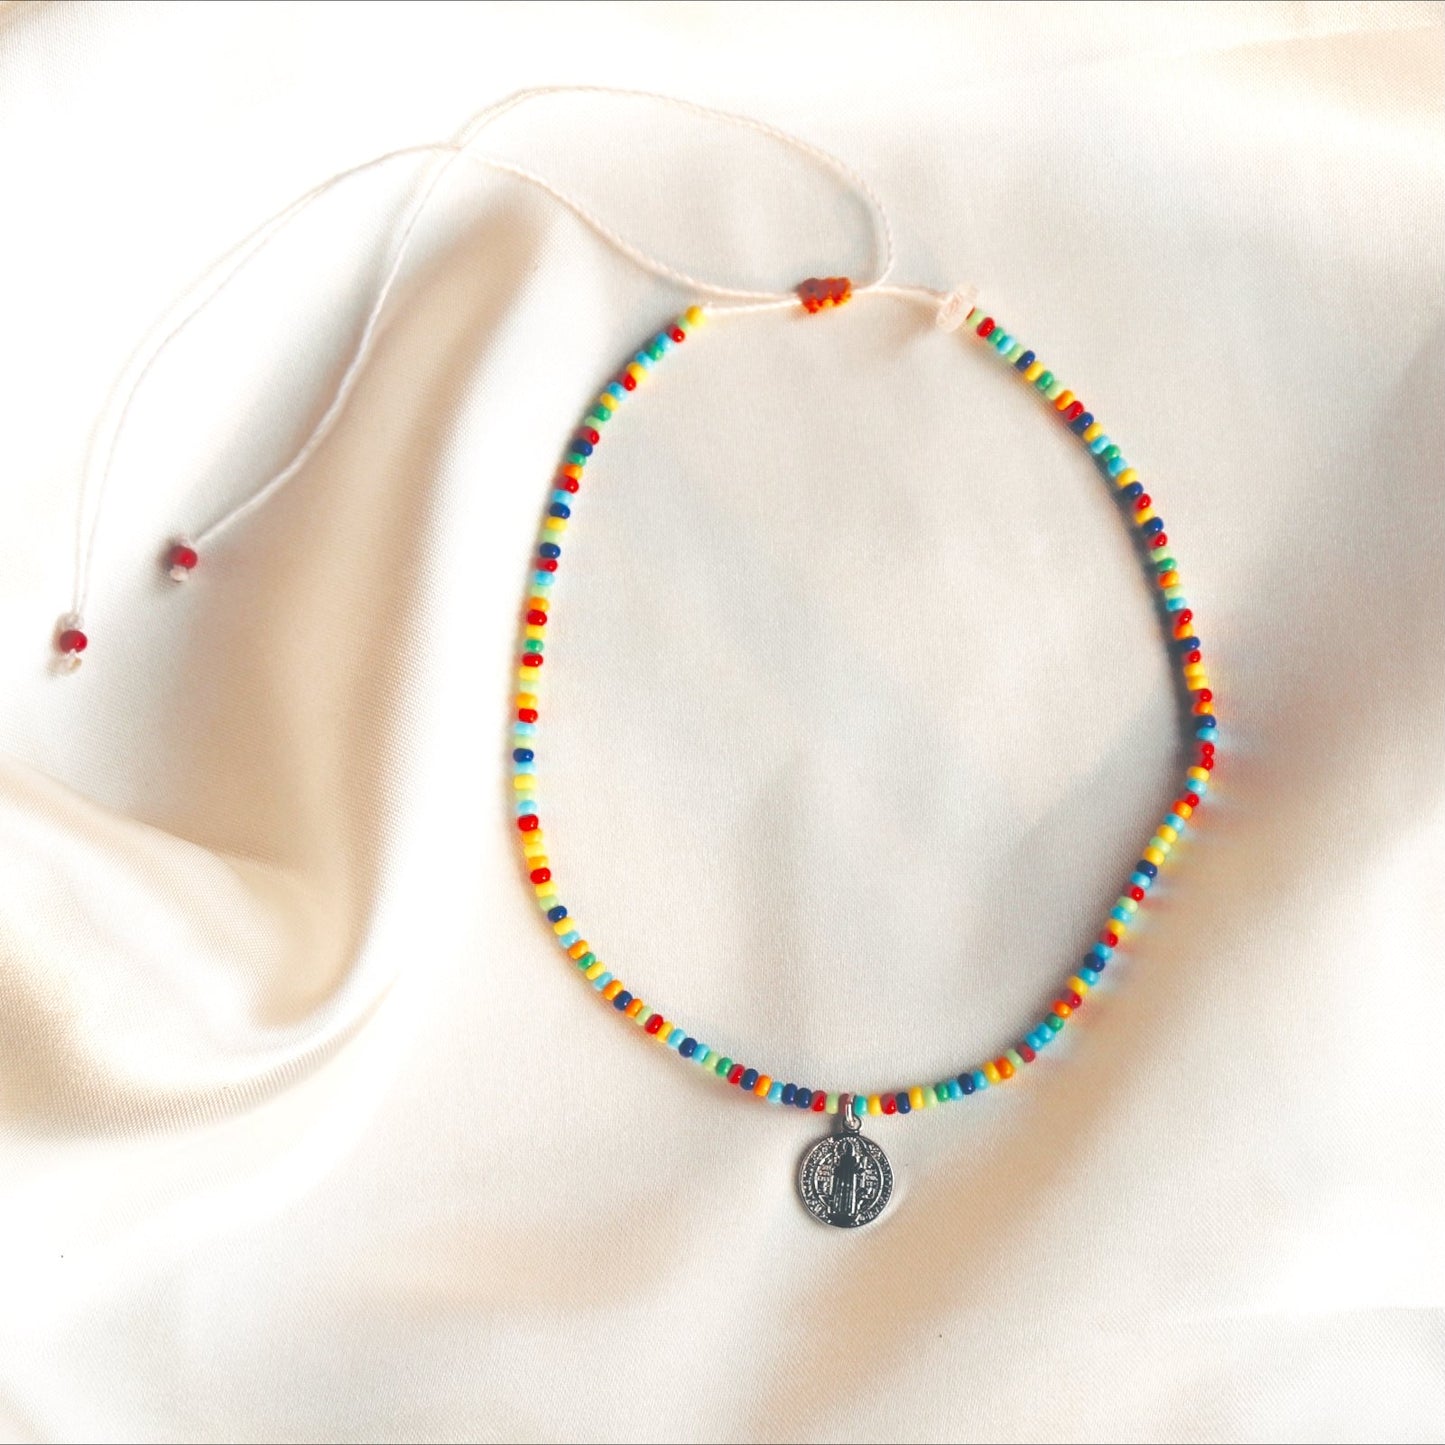 Cardiff Colorful Waterproof Necklace